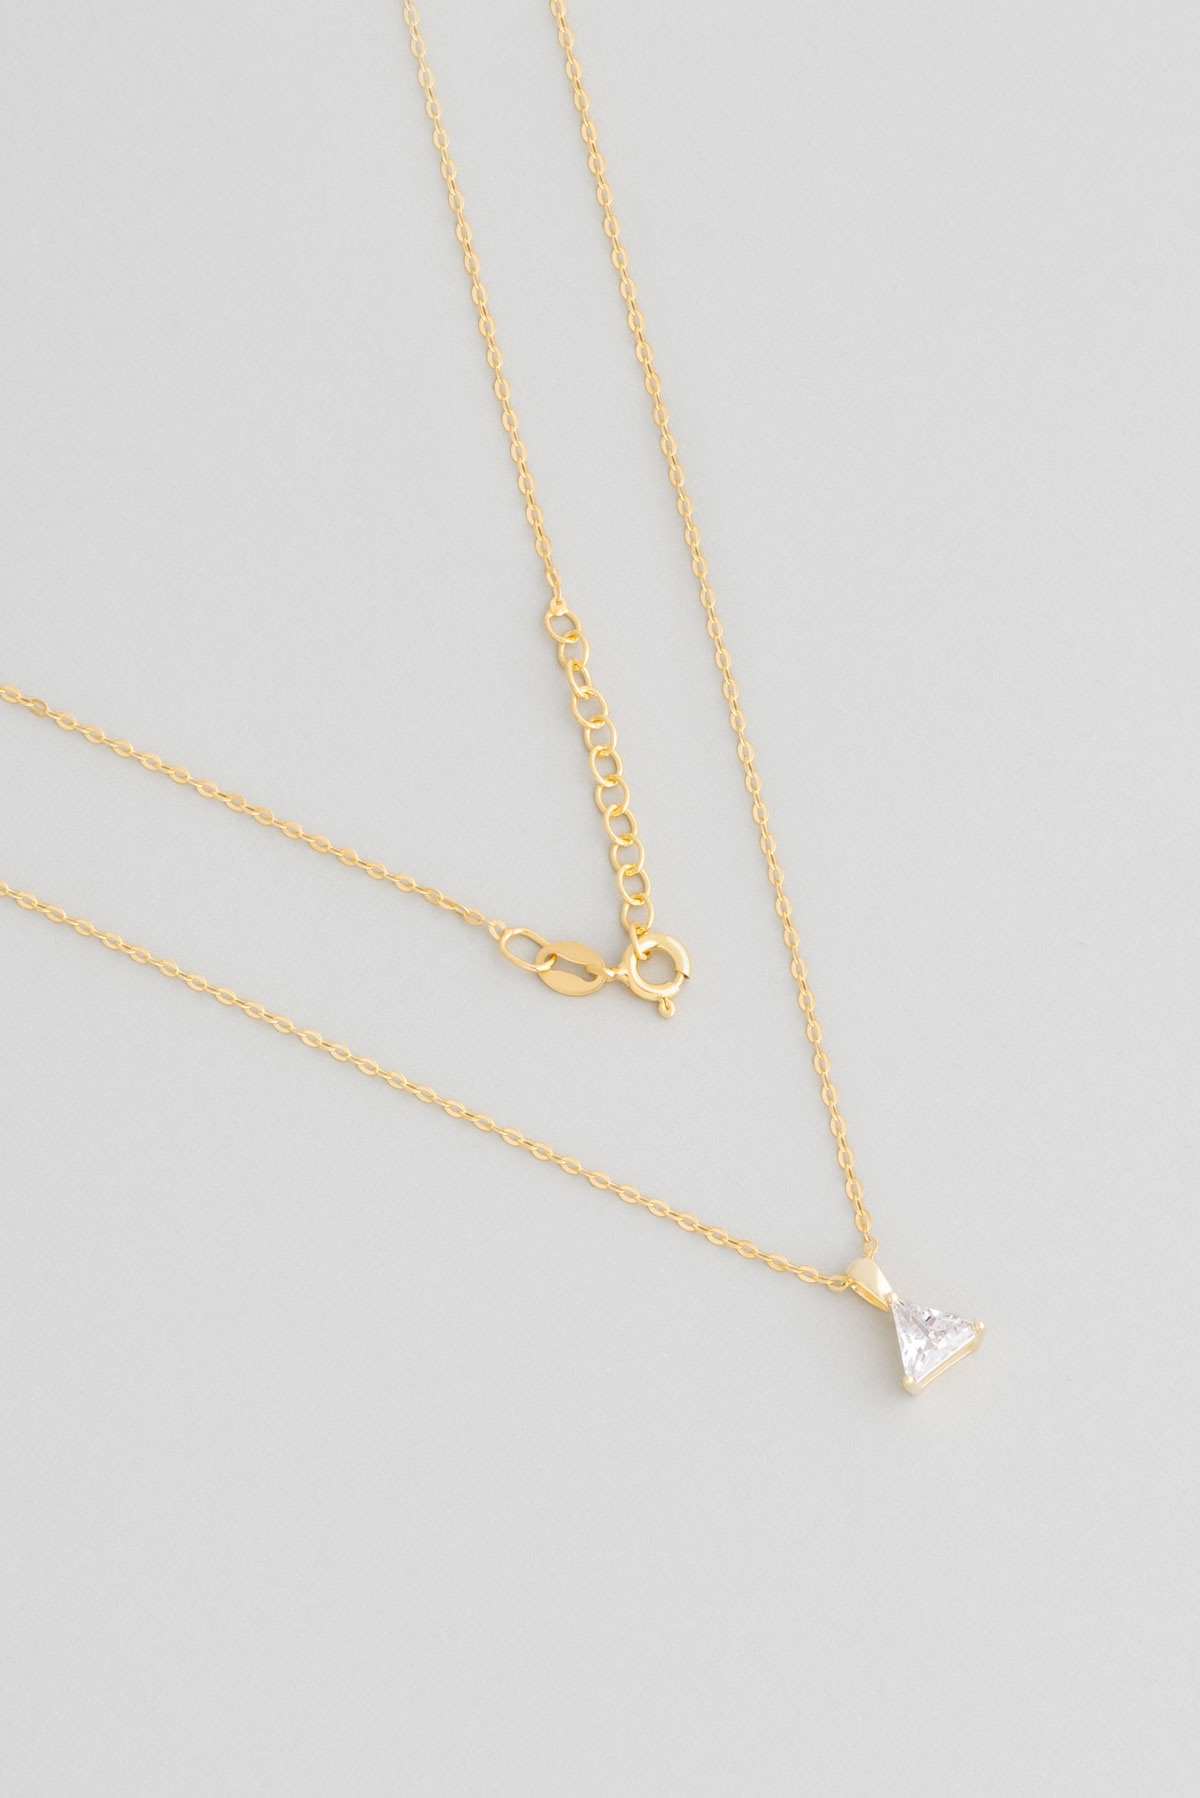 Triangle Cut 6x6mm18 Karat Yellow Gold Plated Silver Minimal Necklace 